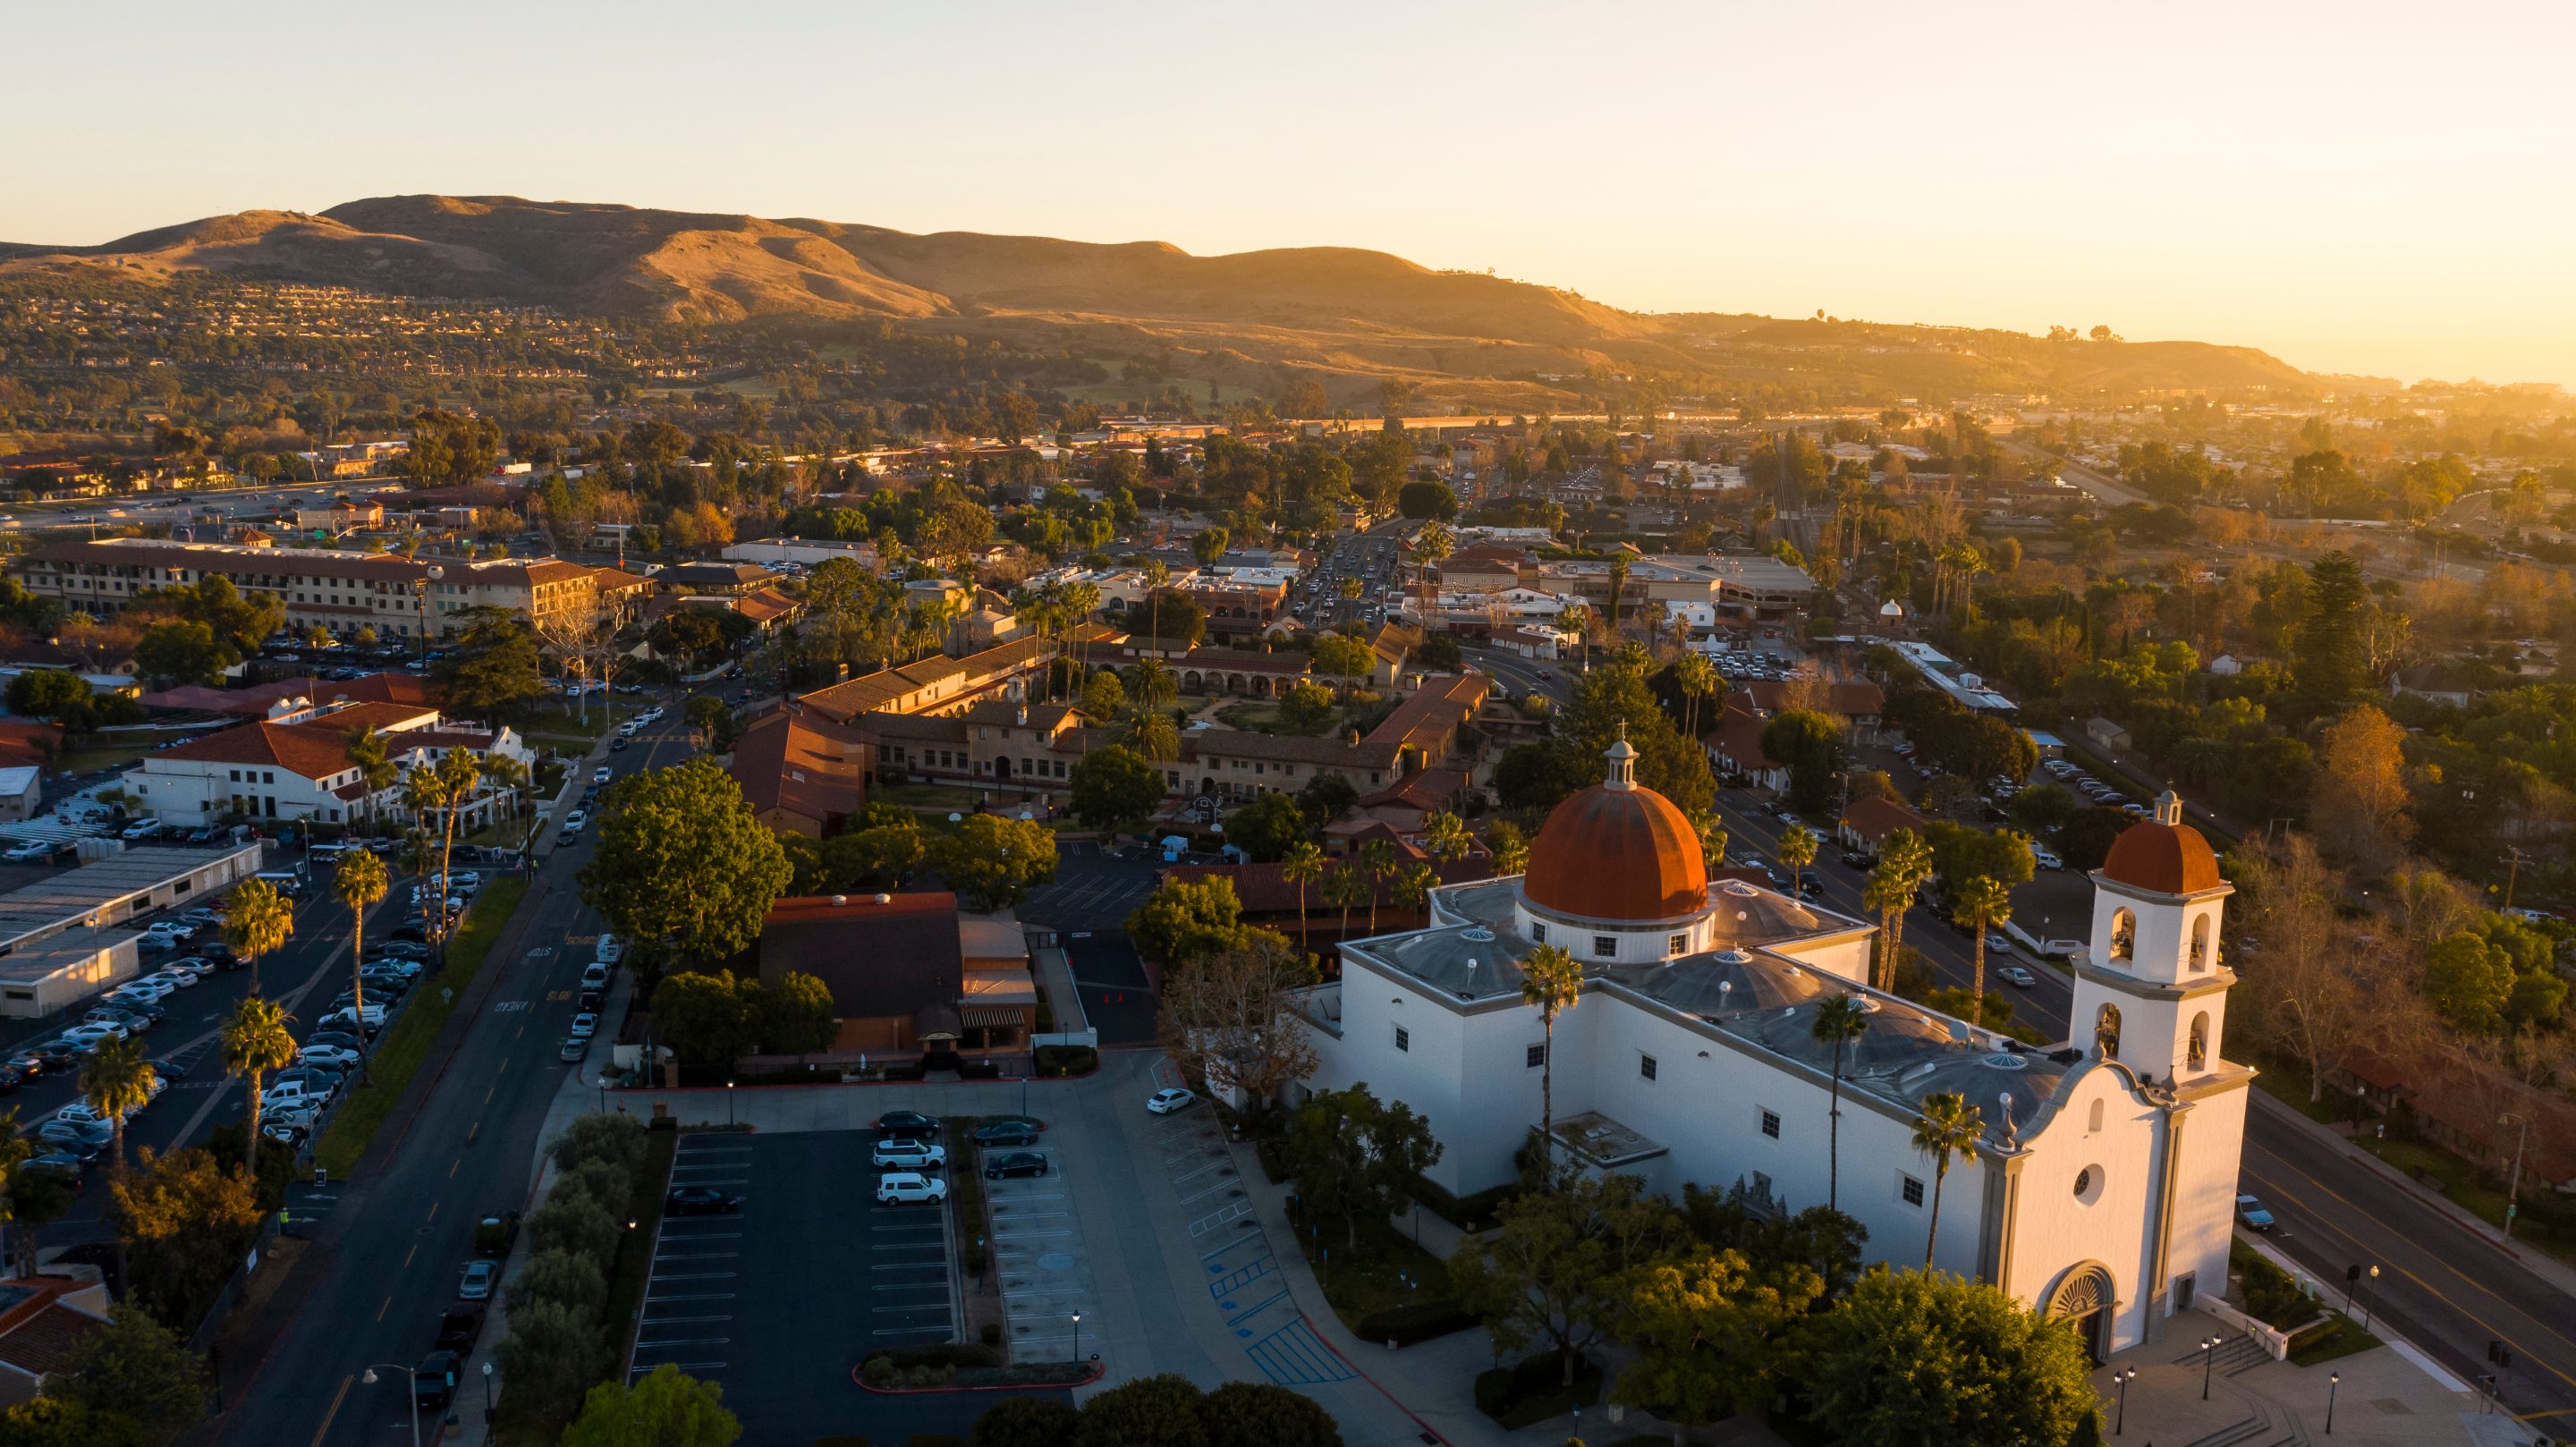 Sunset aerial view of the Spanish Colonial era mission and surrounding city of downtown San Juan Capistrano, California, USA.